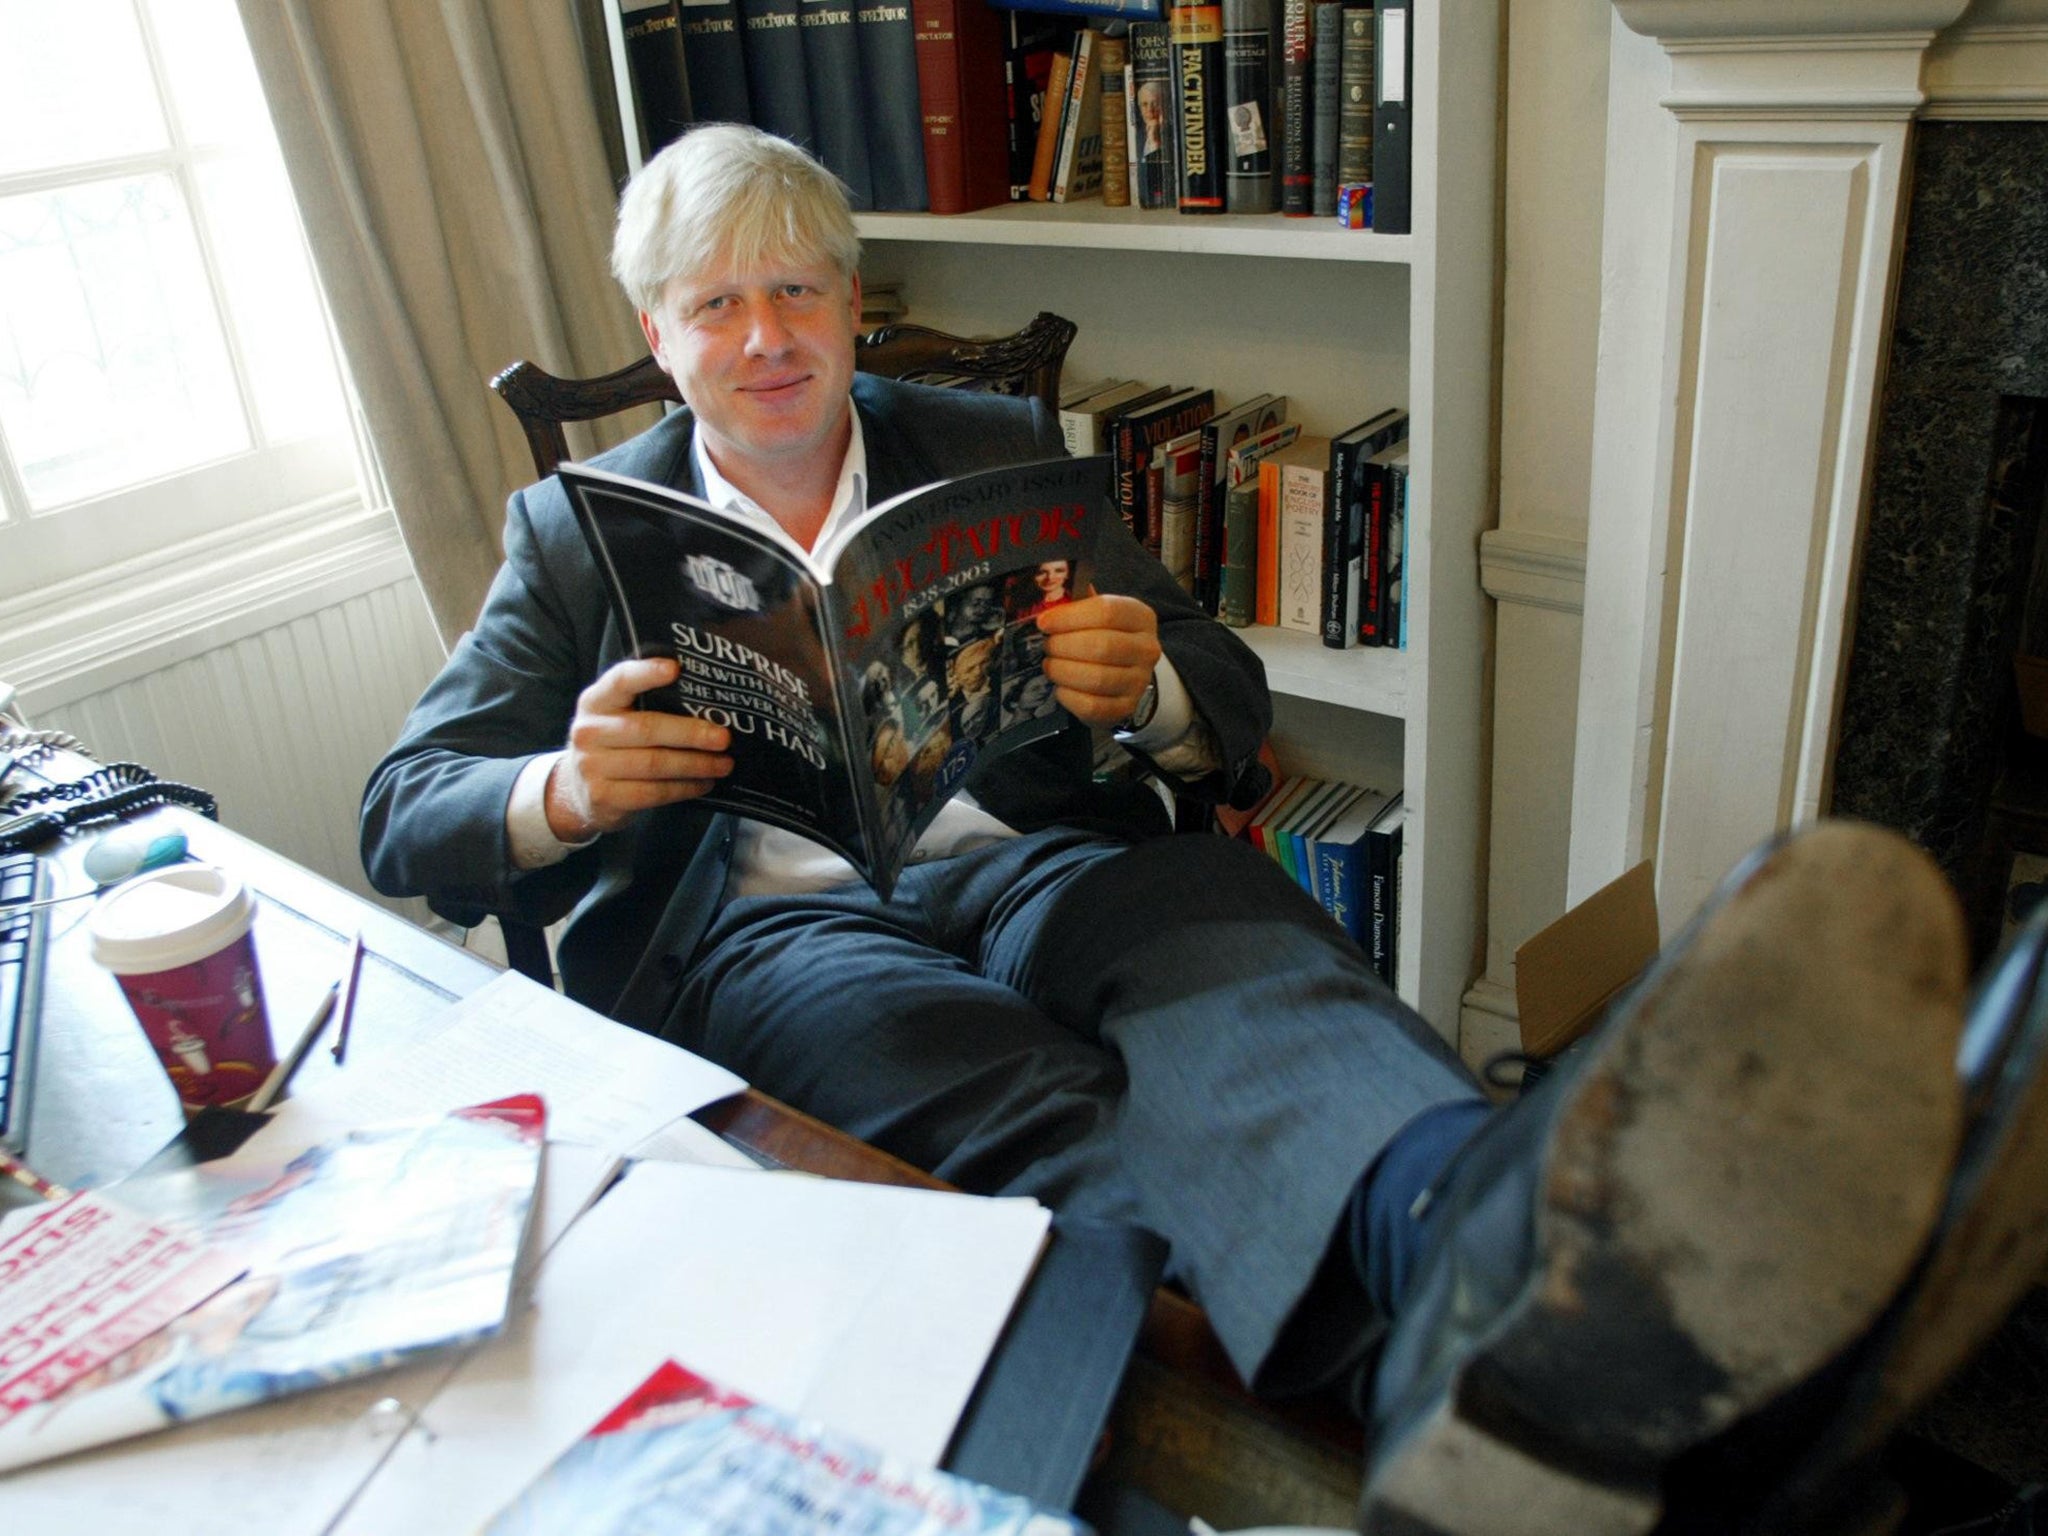 The London mayor hatched plan in 1999 when he was editor of The Spectator